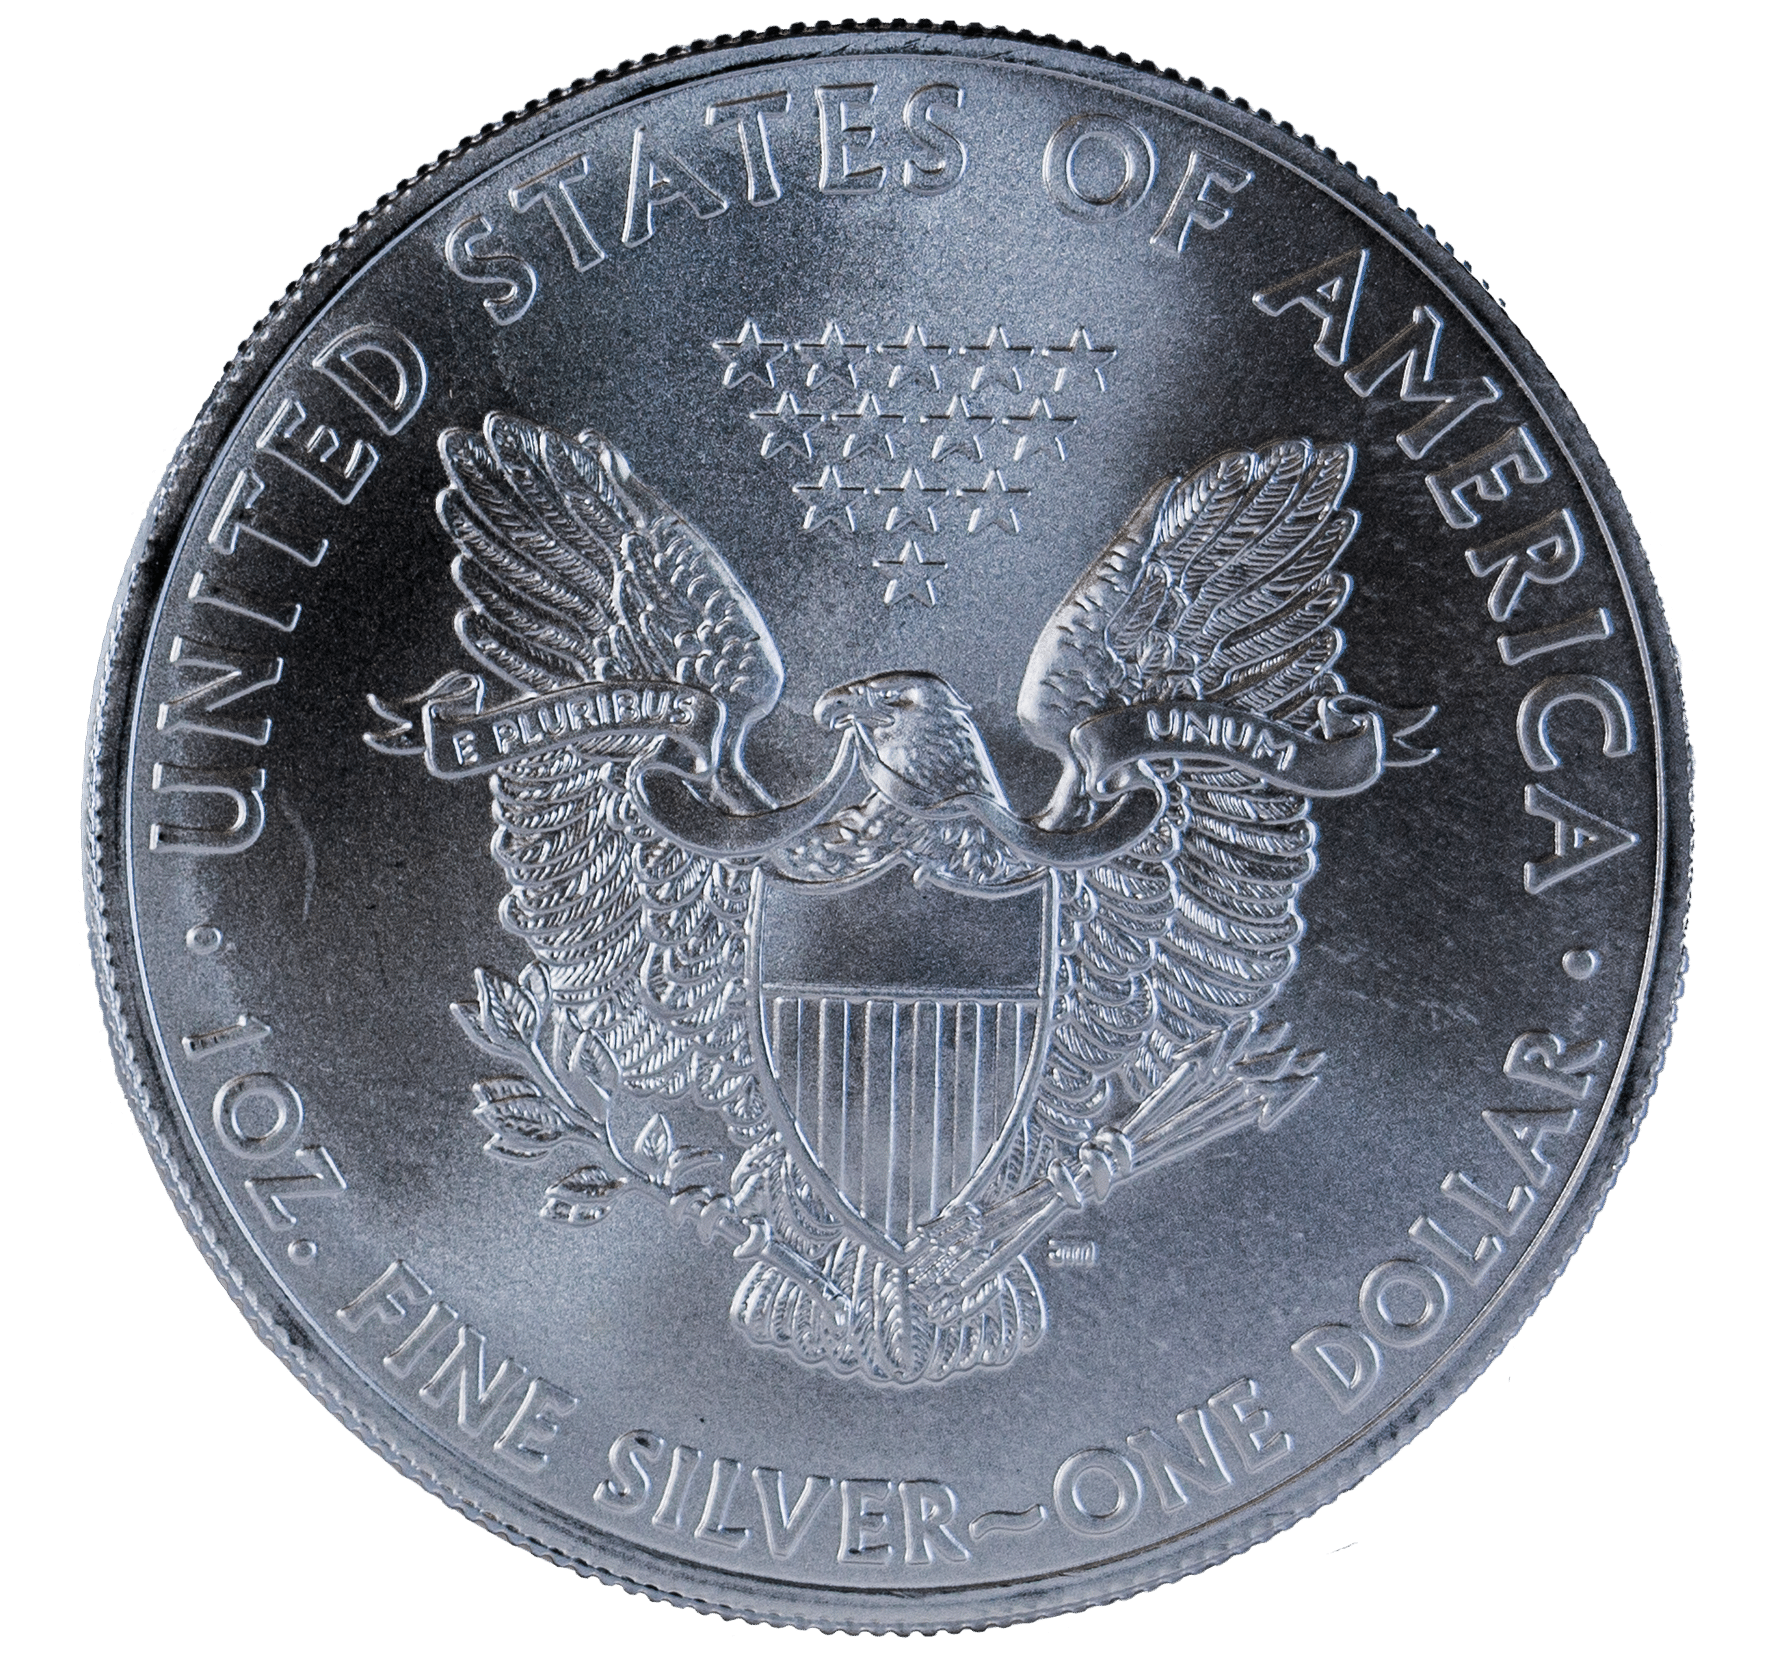 1-ounce Silver Eagle coin with radiant finish.